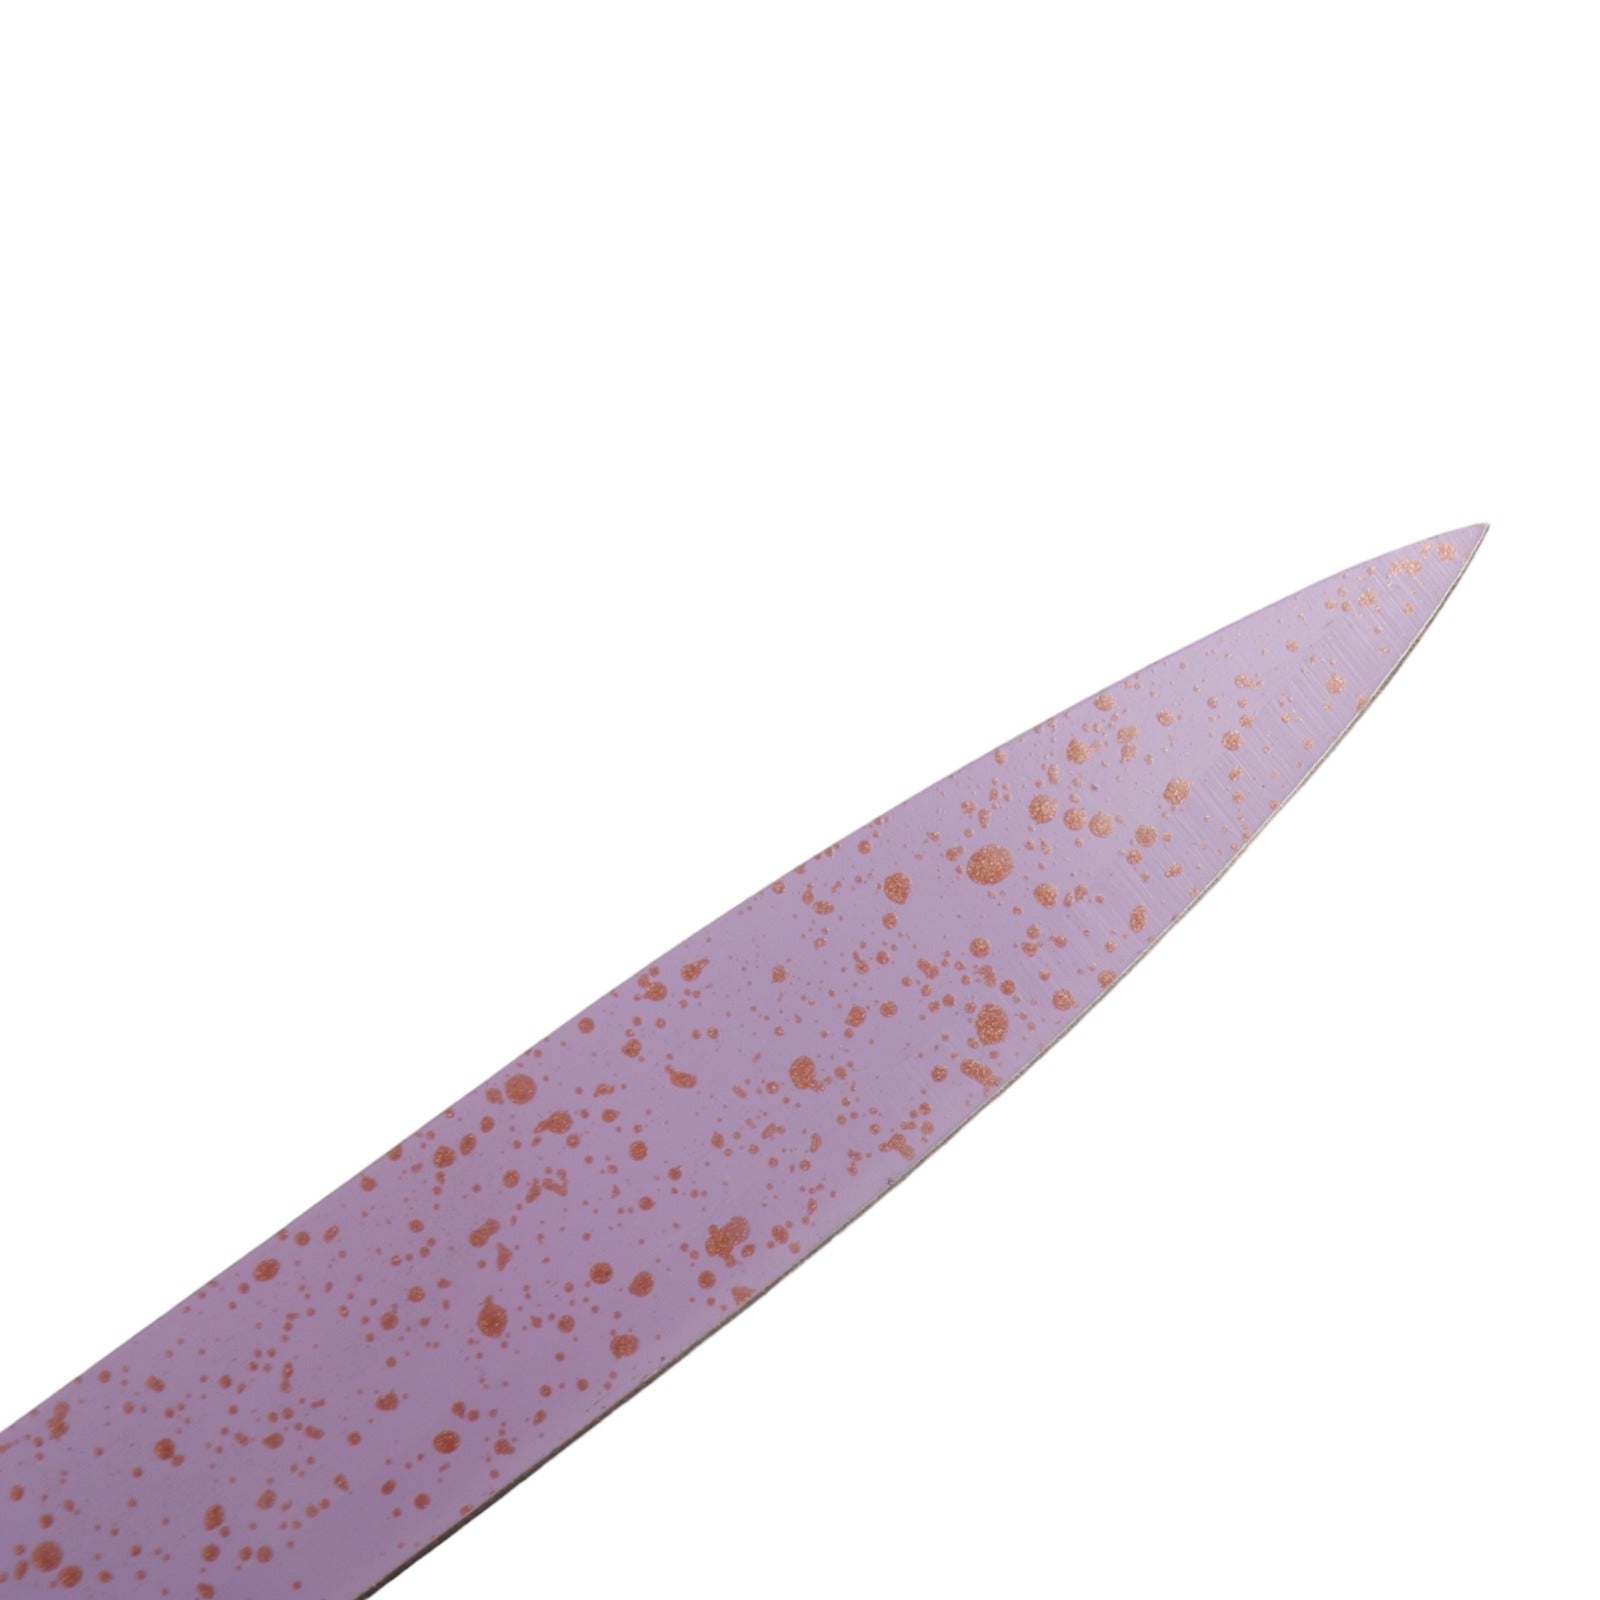 Knife 9cm paring Coloured with Cover CT739